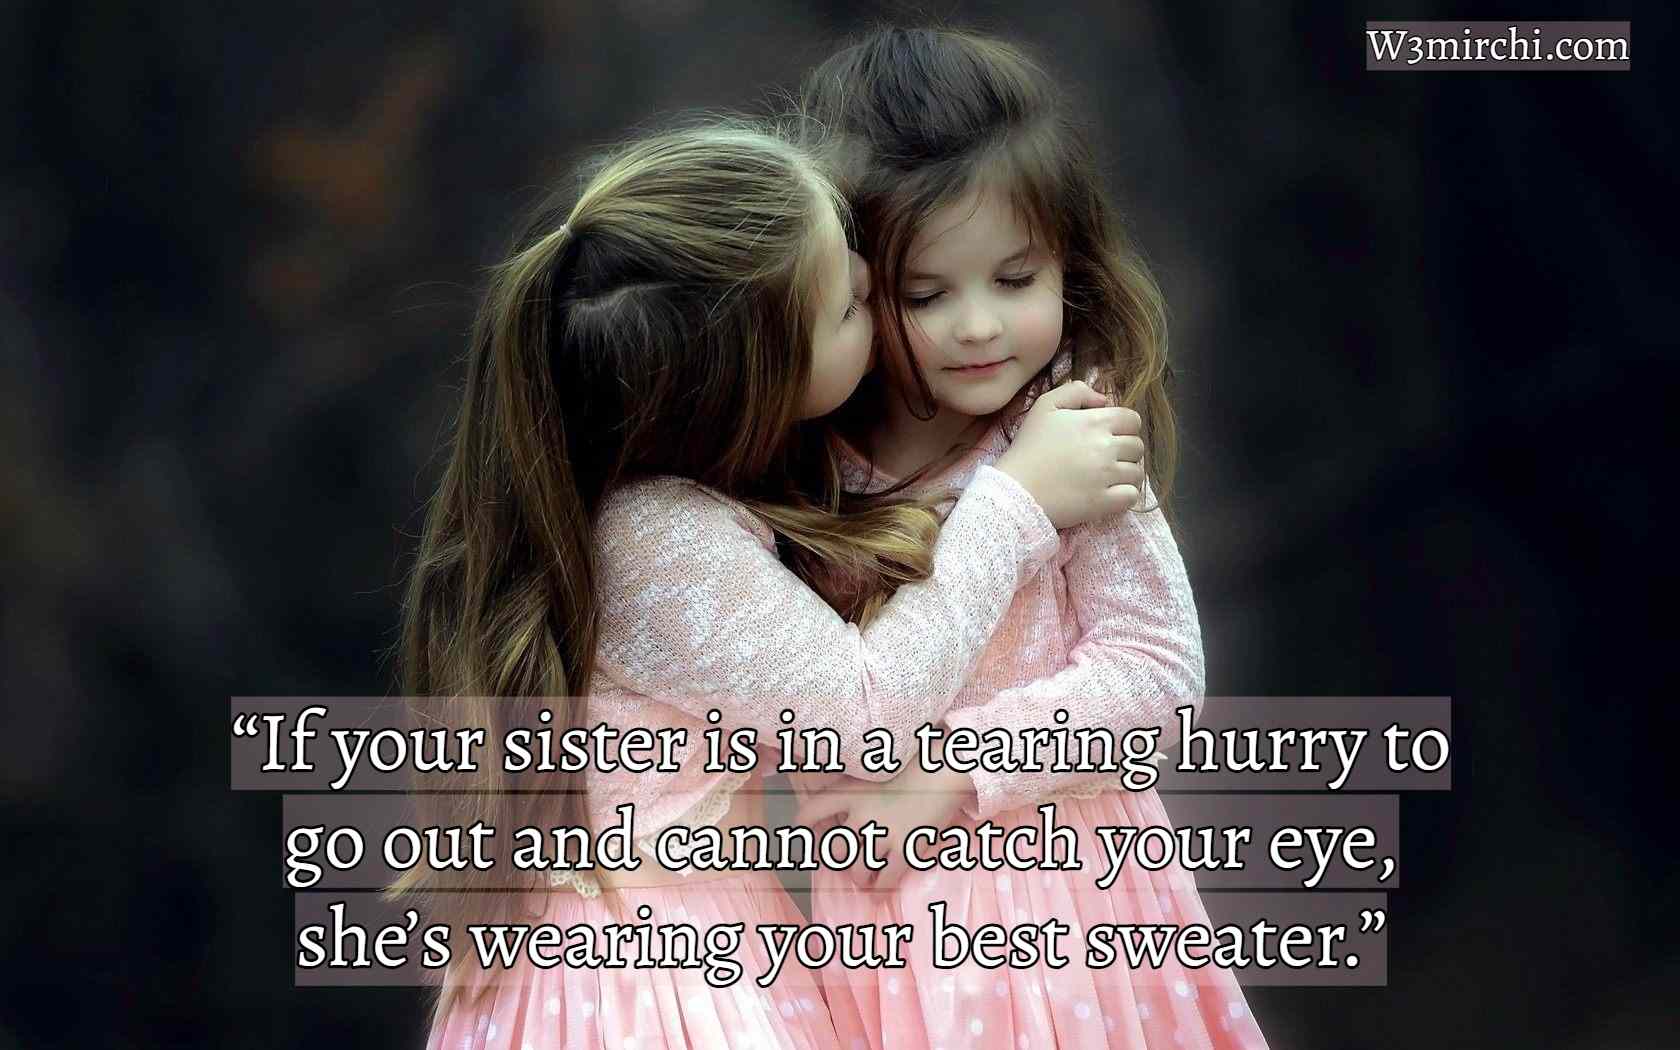 “If your sister is in a tearing hurry to go